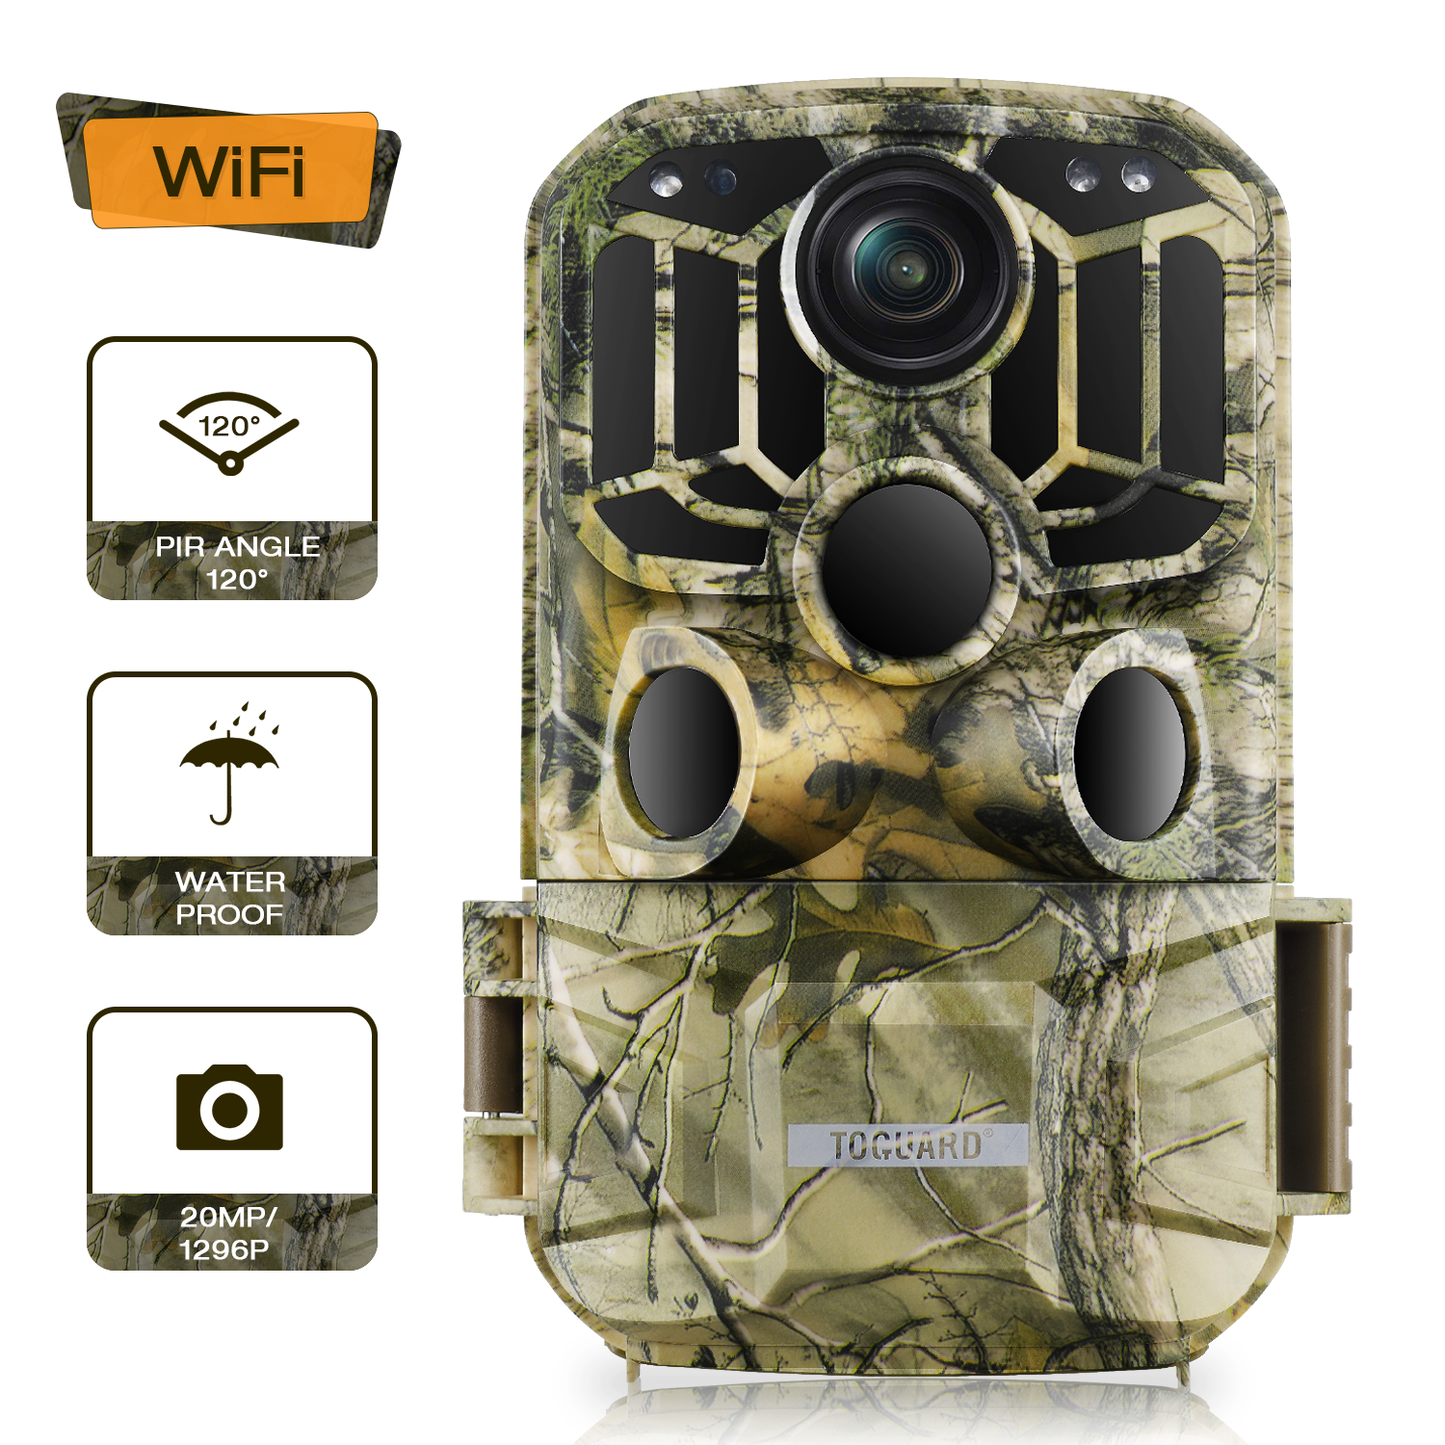 CAMPARK WiFi Bluetooth Trail Camera 24MP 1296P Night Vision Game Camera 3 PIR 0.2s Motion Activated Hunting Deer Camera Waterproof IP66 for Monitoring Outdoor Wildlife Trail Cam 2.0" LCD